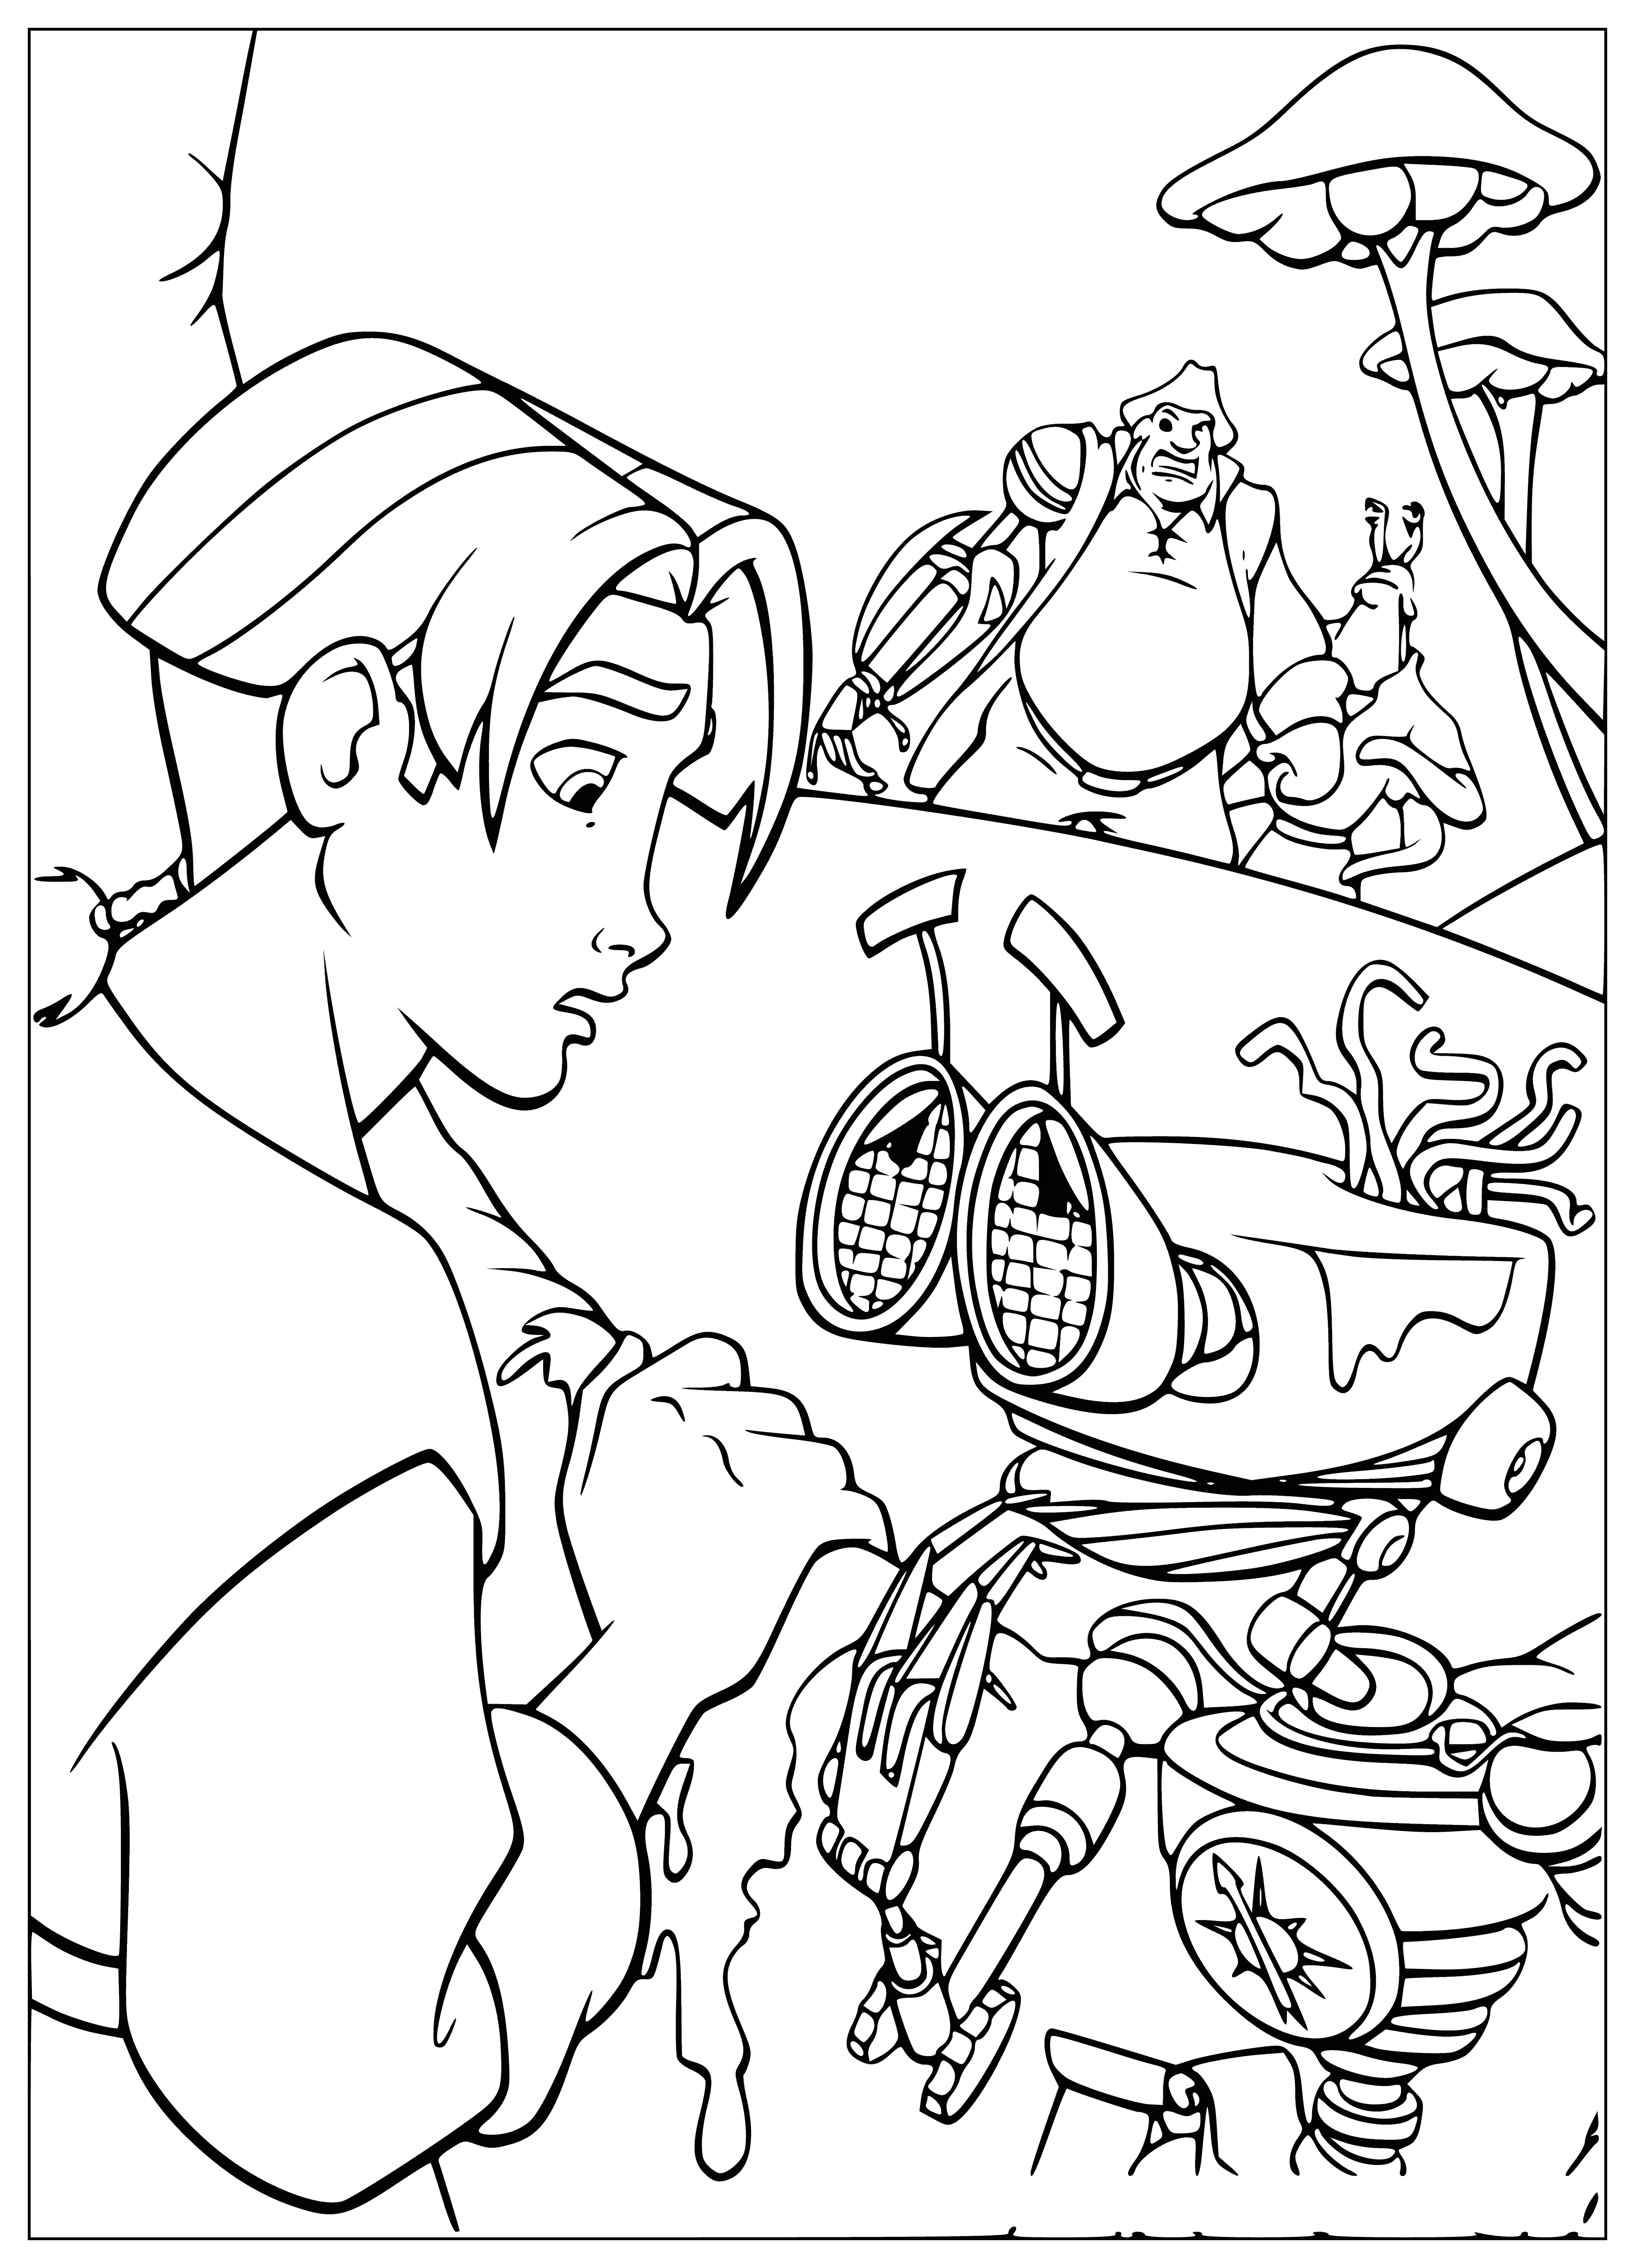 coloring page: A blue planet with a sun & stars, two moons, conts & animals.